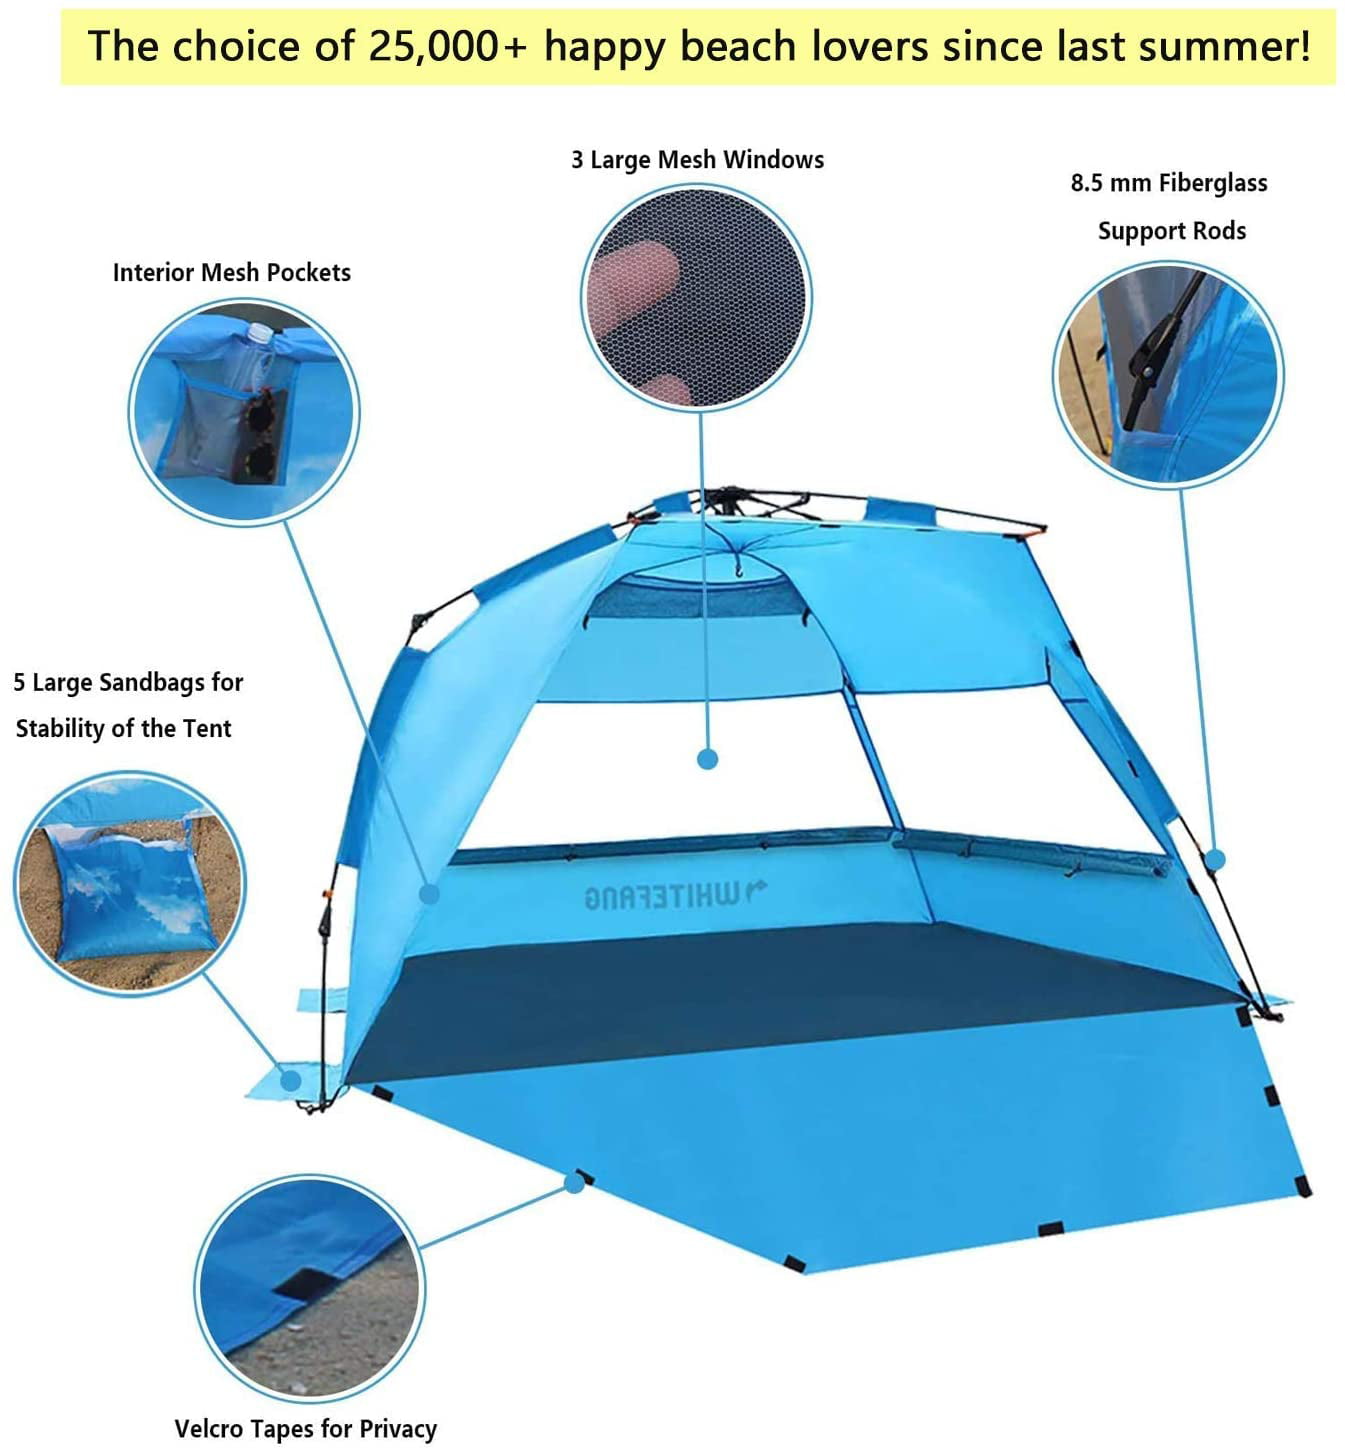 WhiteFang Deluxe XL Pop Up Beach Tent Sun Shade Shelter for 3-4 Person Extendable Floor with 3 Ventilating Windows Plus Carrying Bag Stakes UV Protection and Guy Lines